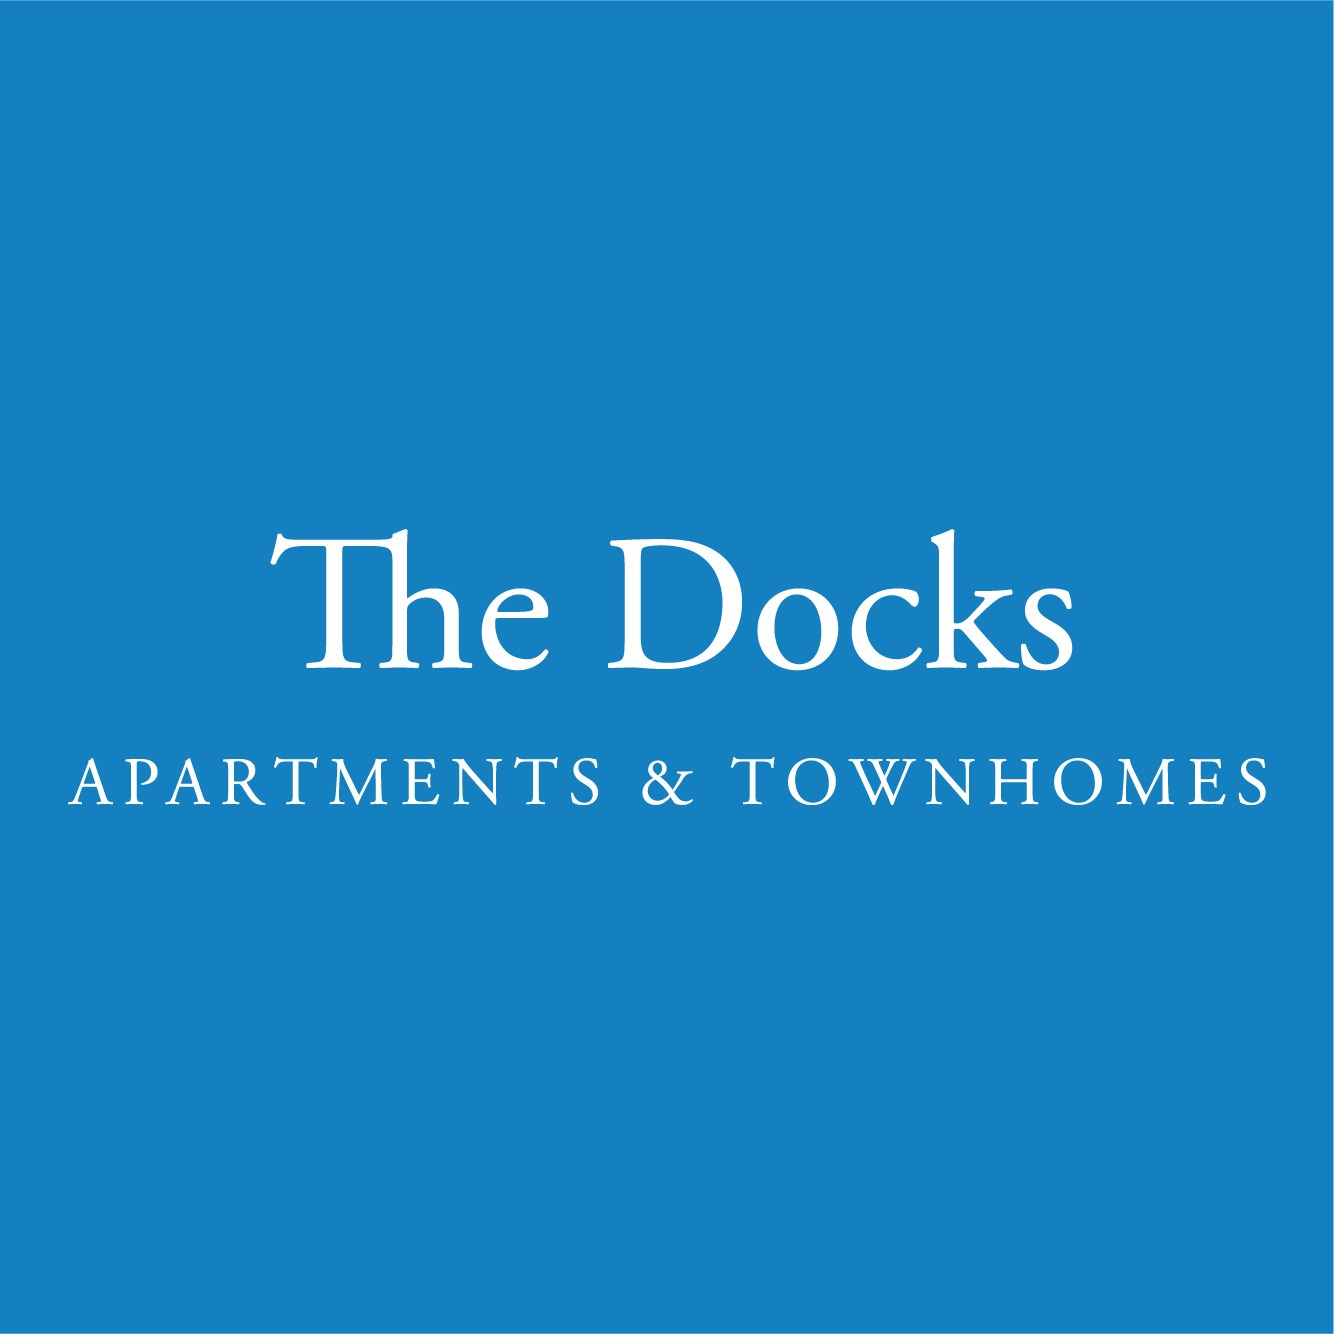 The Docks Apartments & Townhomes